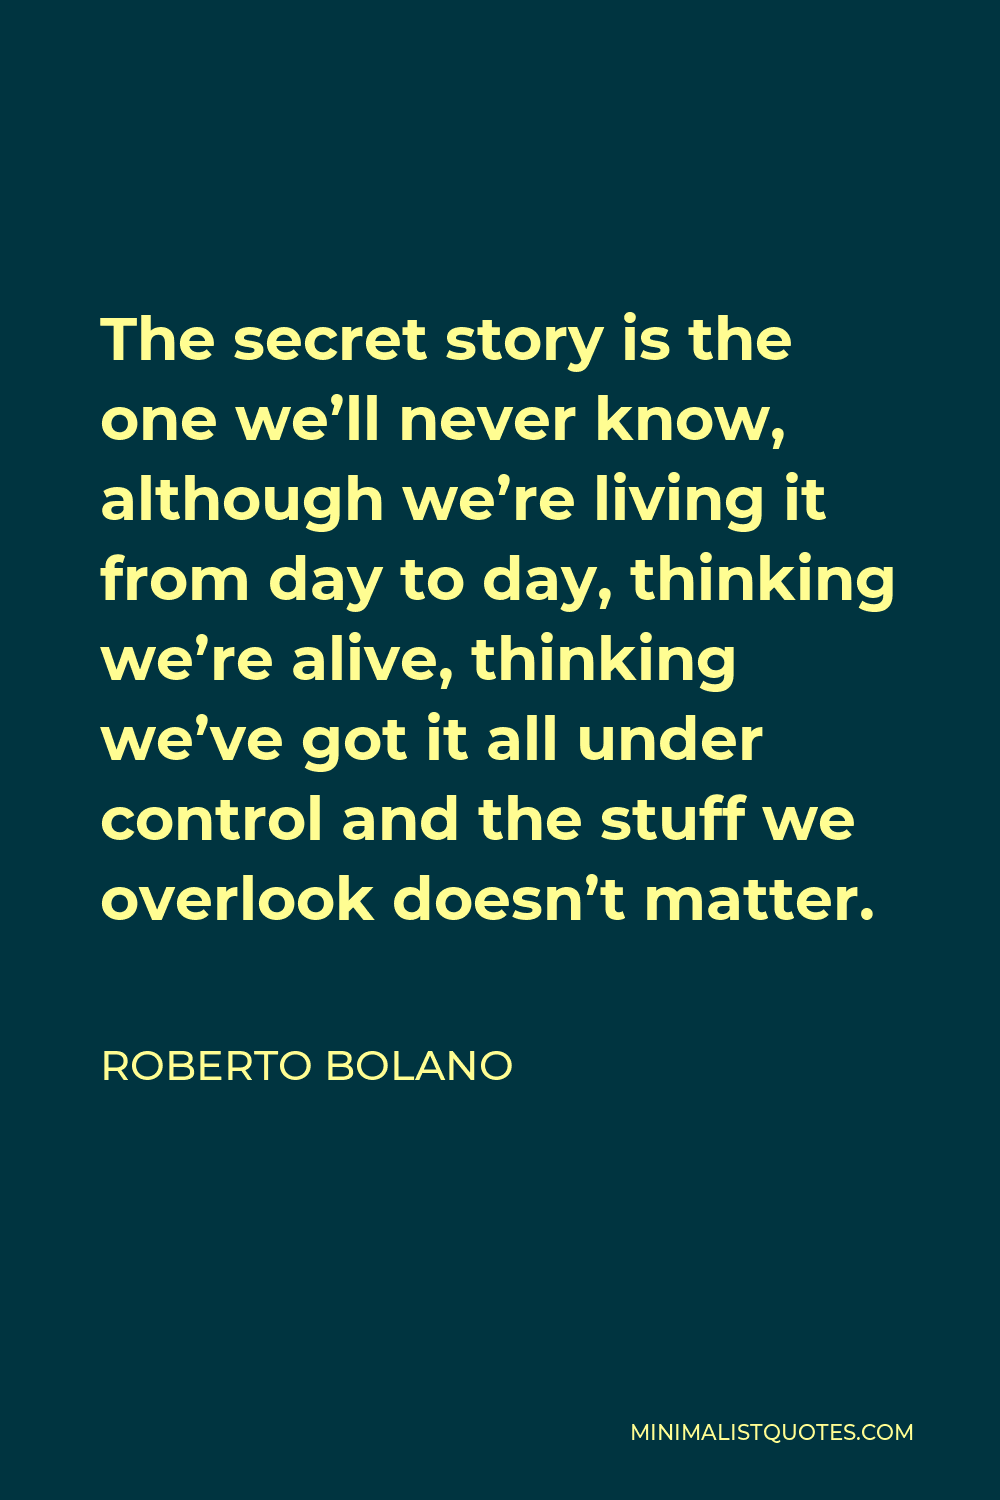 Roberto Bolano Quote - The secret story is the one we’ll never know, although we’re living it from day to day, thinking we’re alive, thinking we’ve got it all under control and the stuff we overlook doesn’t matter.